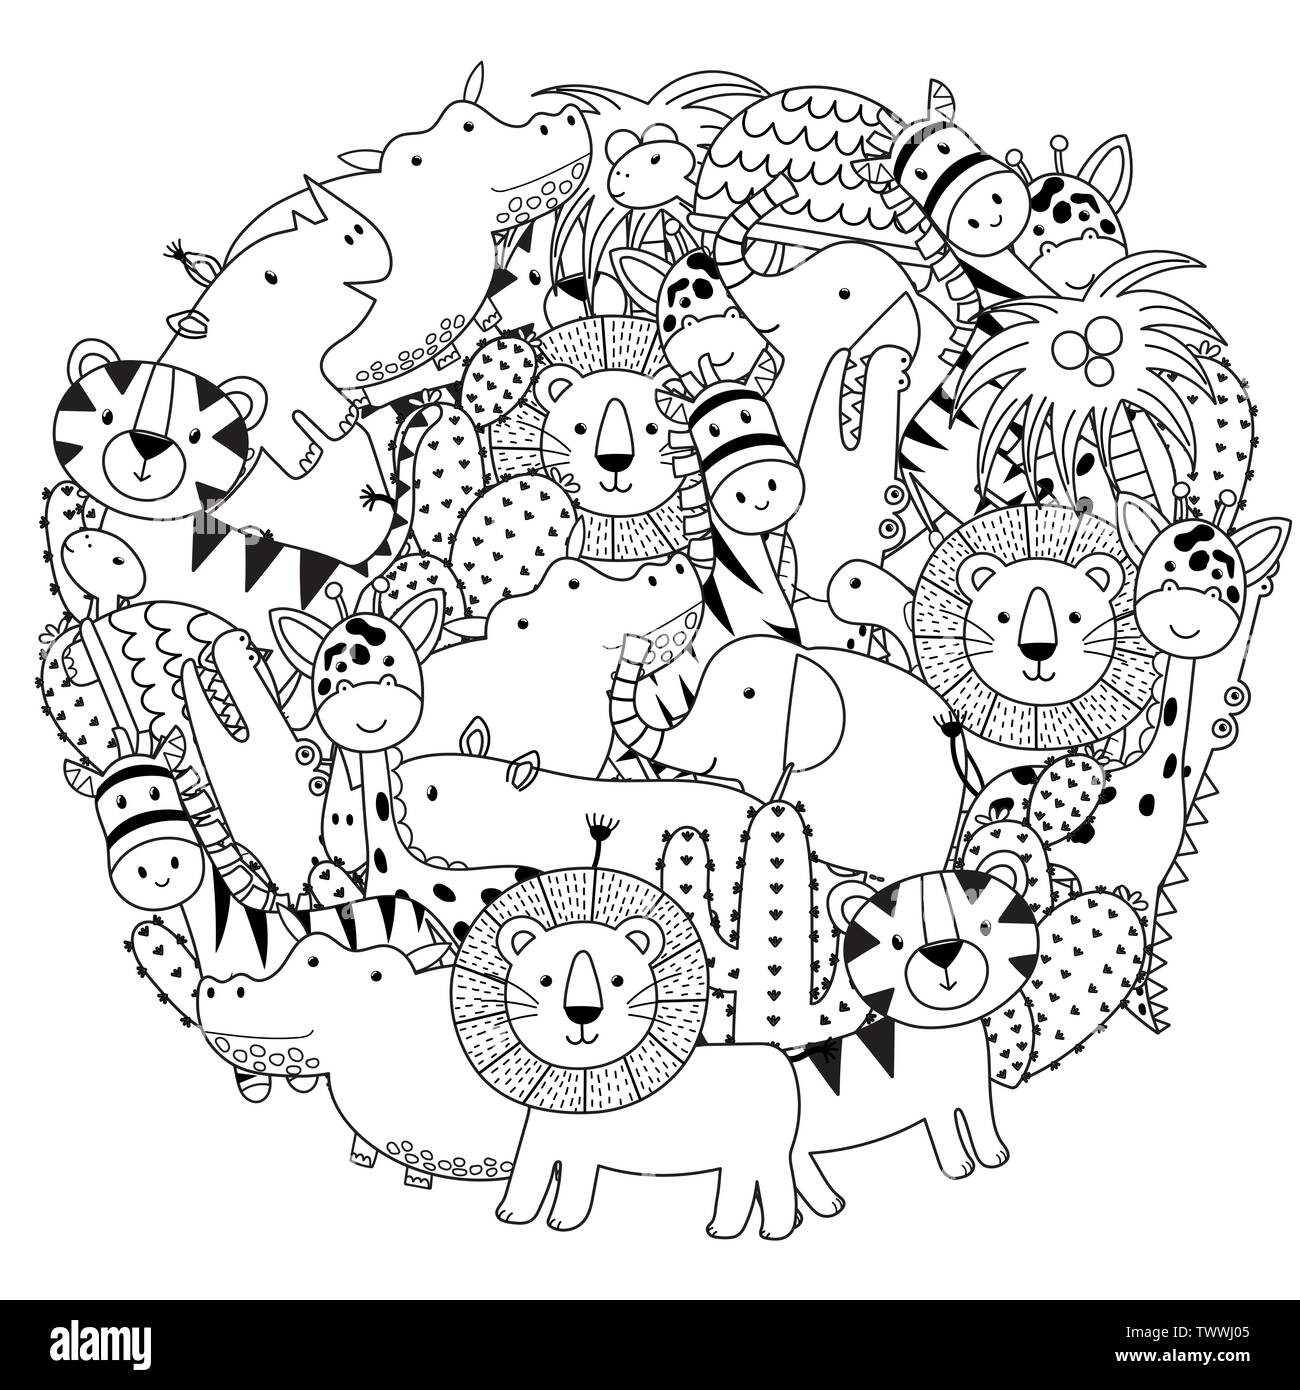 Circle shape coloring page with funny safari animals. Black and white print. Vector illustration Stock Vector